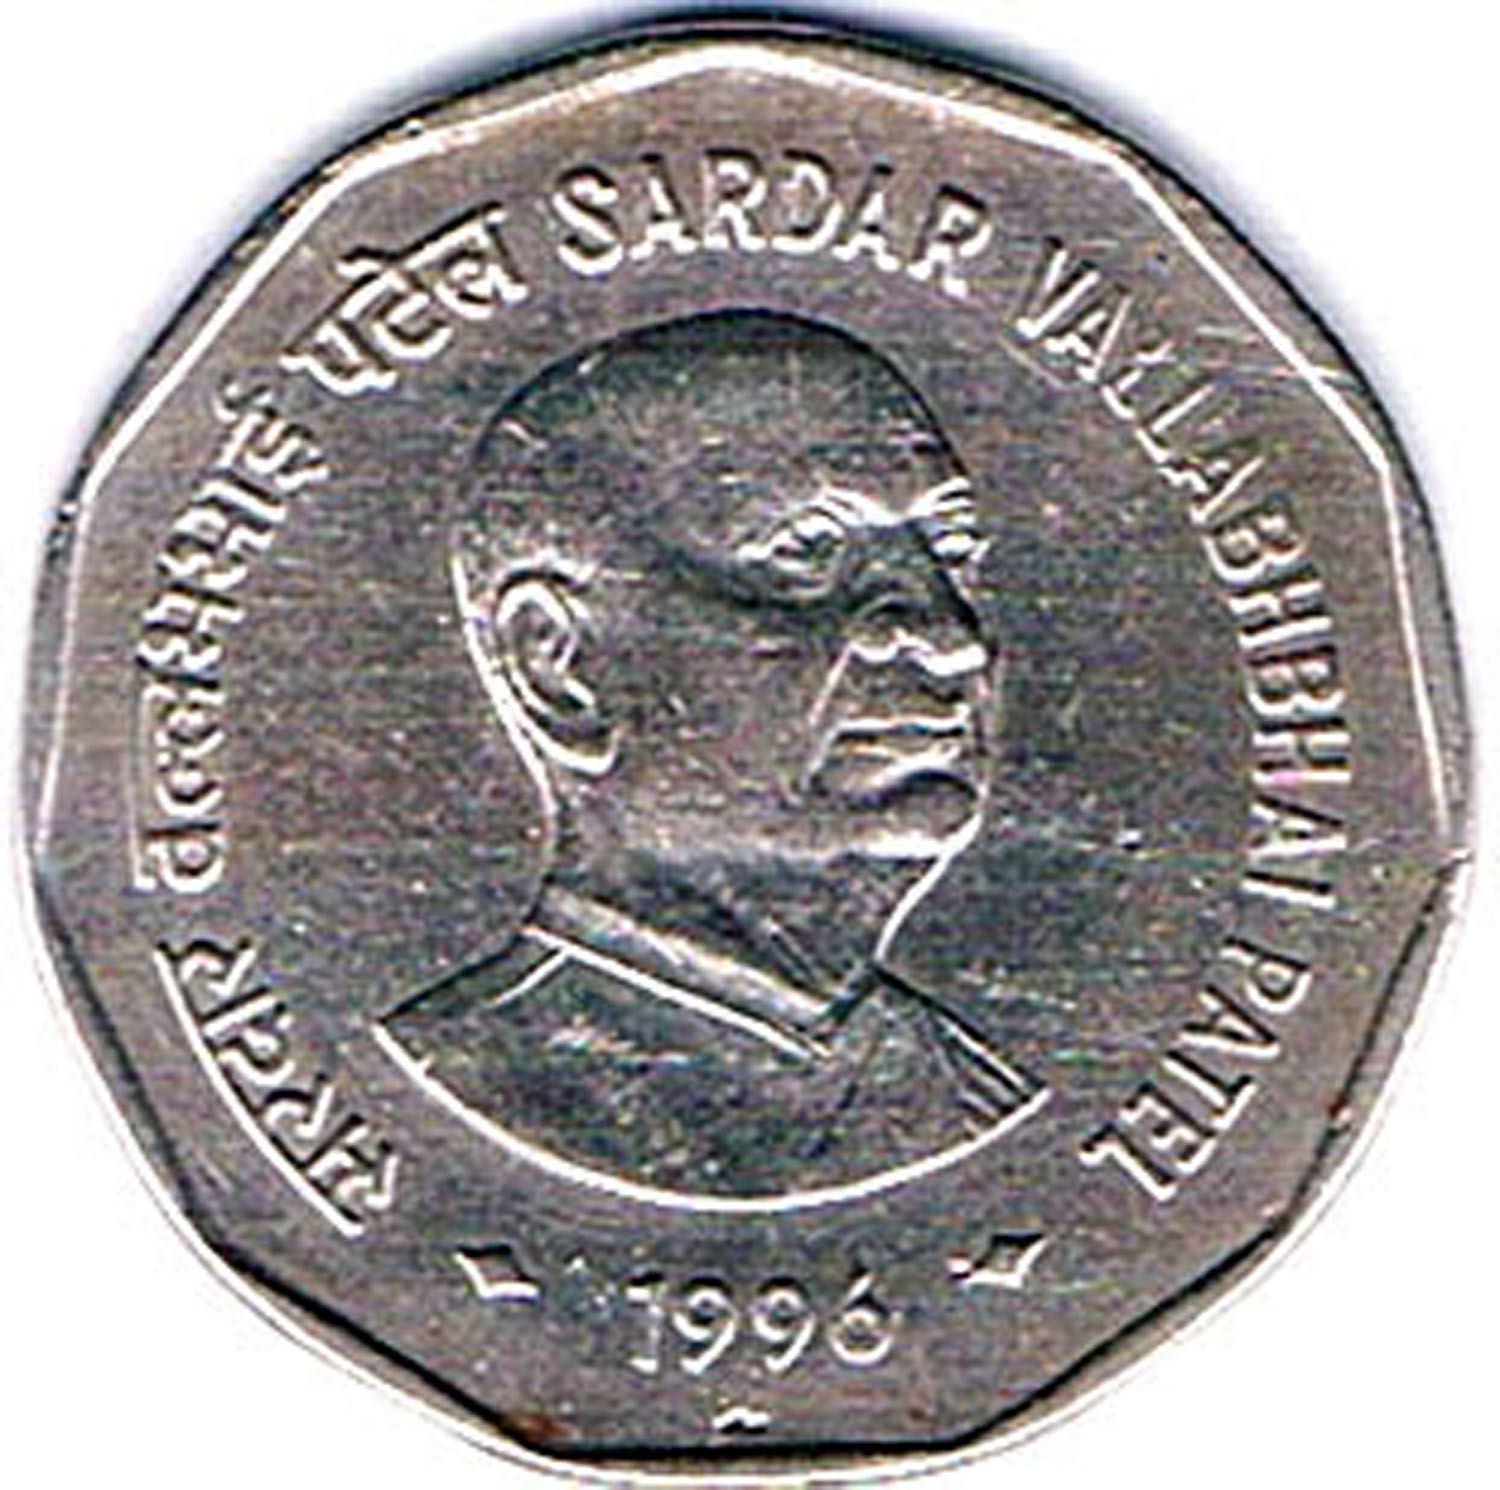     			RAJACOINS 2  /  TWO  RS / RUPEE  VERY RARE USED  COPPER NICKEL  SARDAR VALLABHBHAI PATEL COMMEMORATIVE COLLECTIBLE- USED EXTRA FINE CONDITION